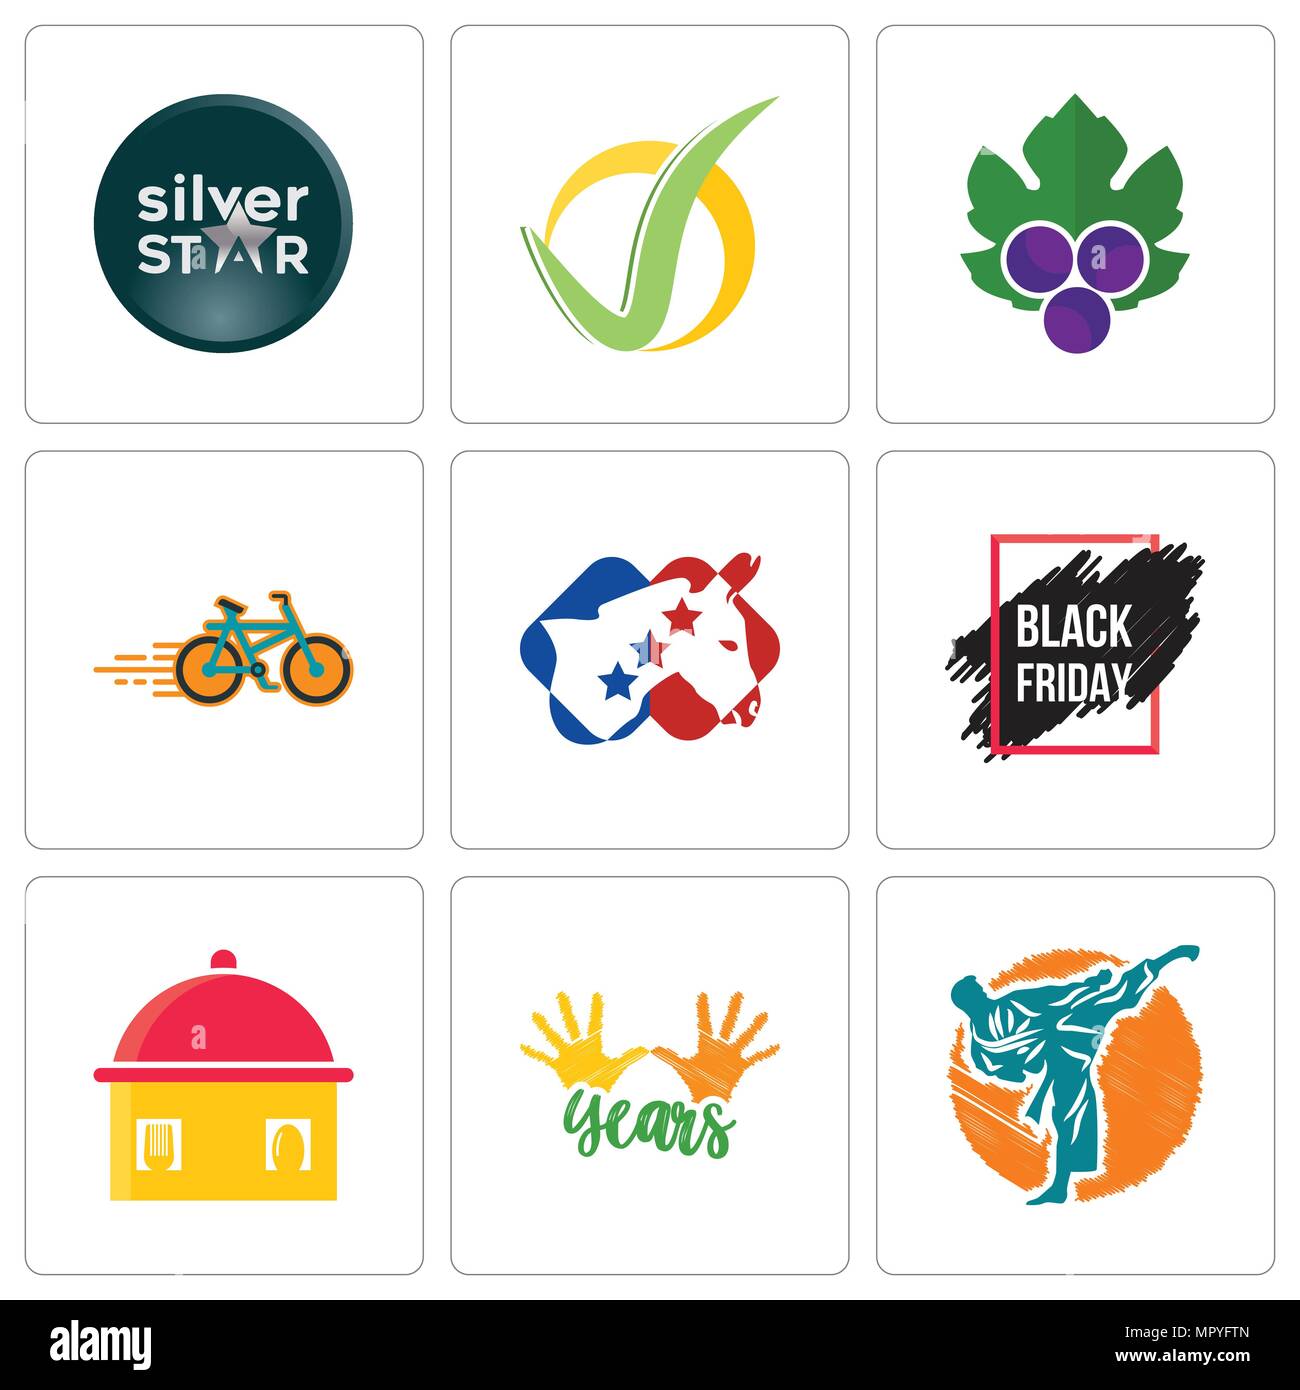 Set Of 9 simple editable icons such as martial arts, 10 years, homemade food, black friday sale, democrat, bike shop, grape leaves, checkmark, silver  Stock Vector